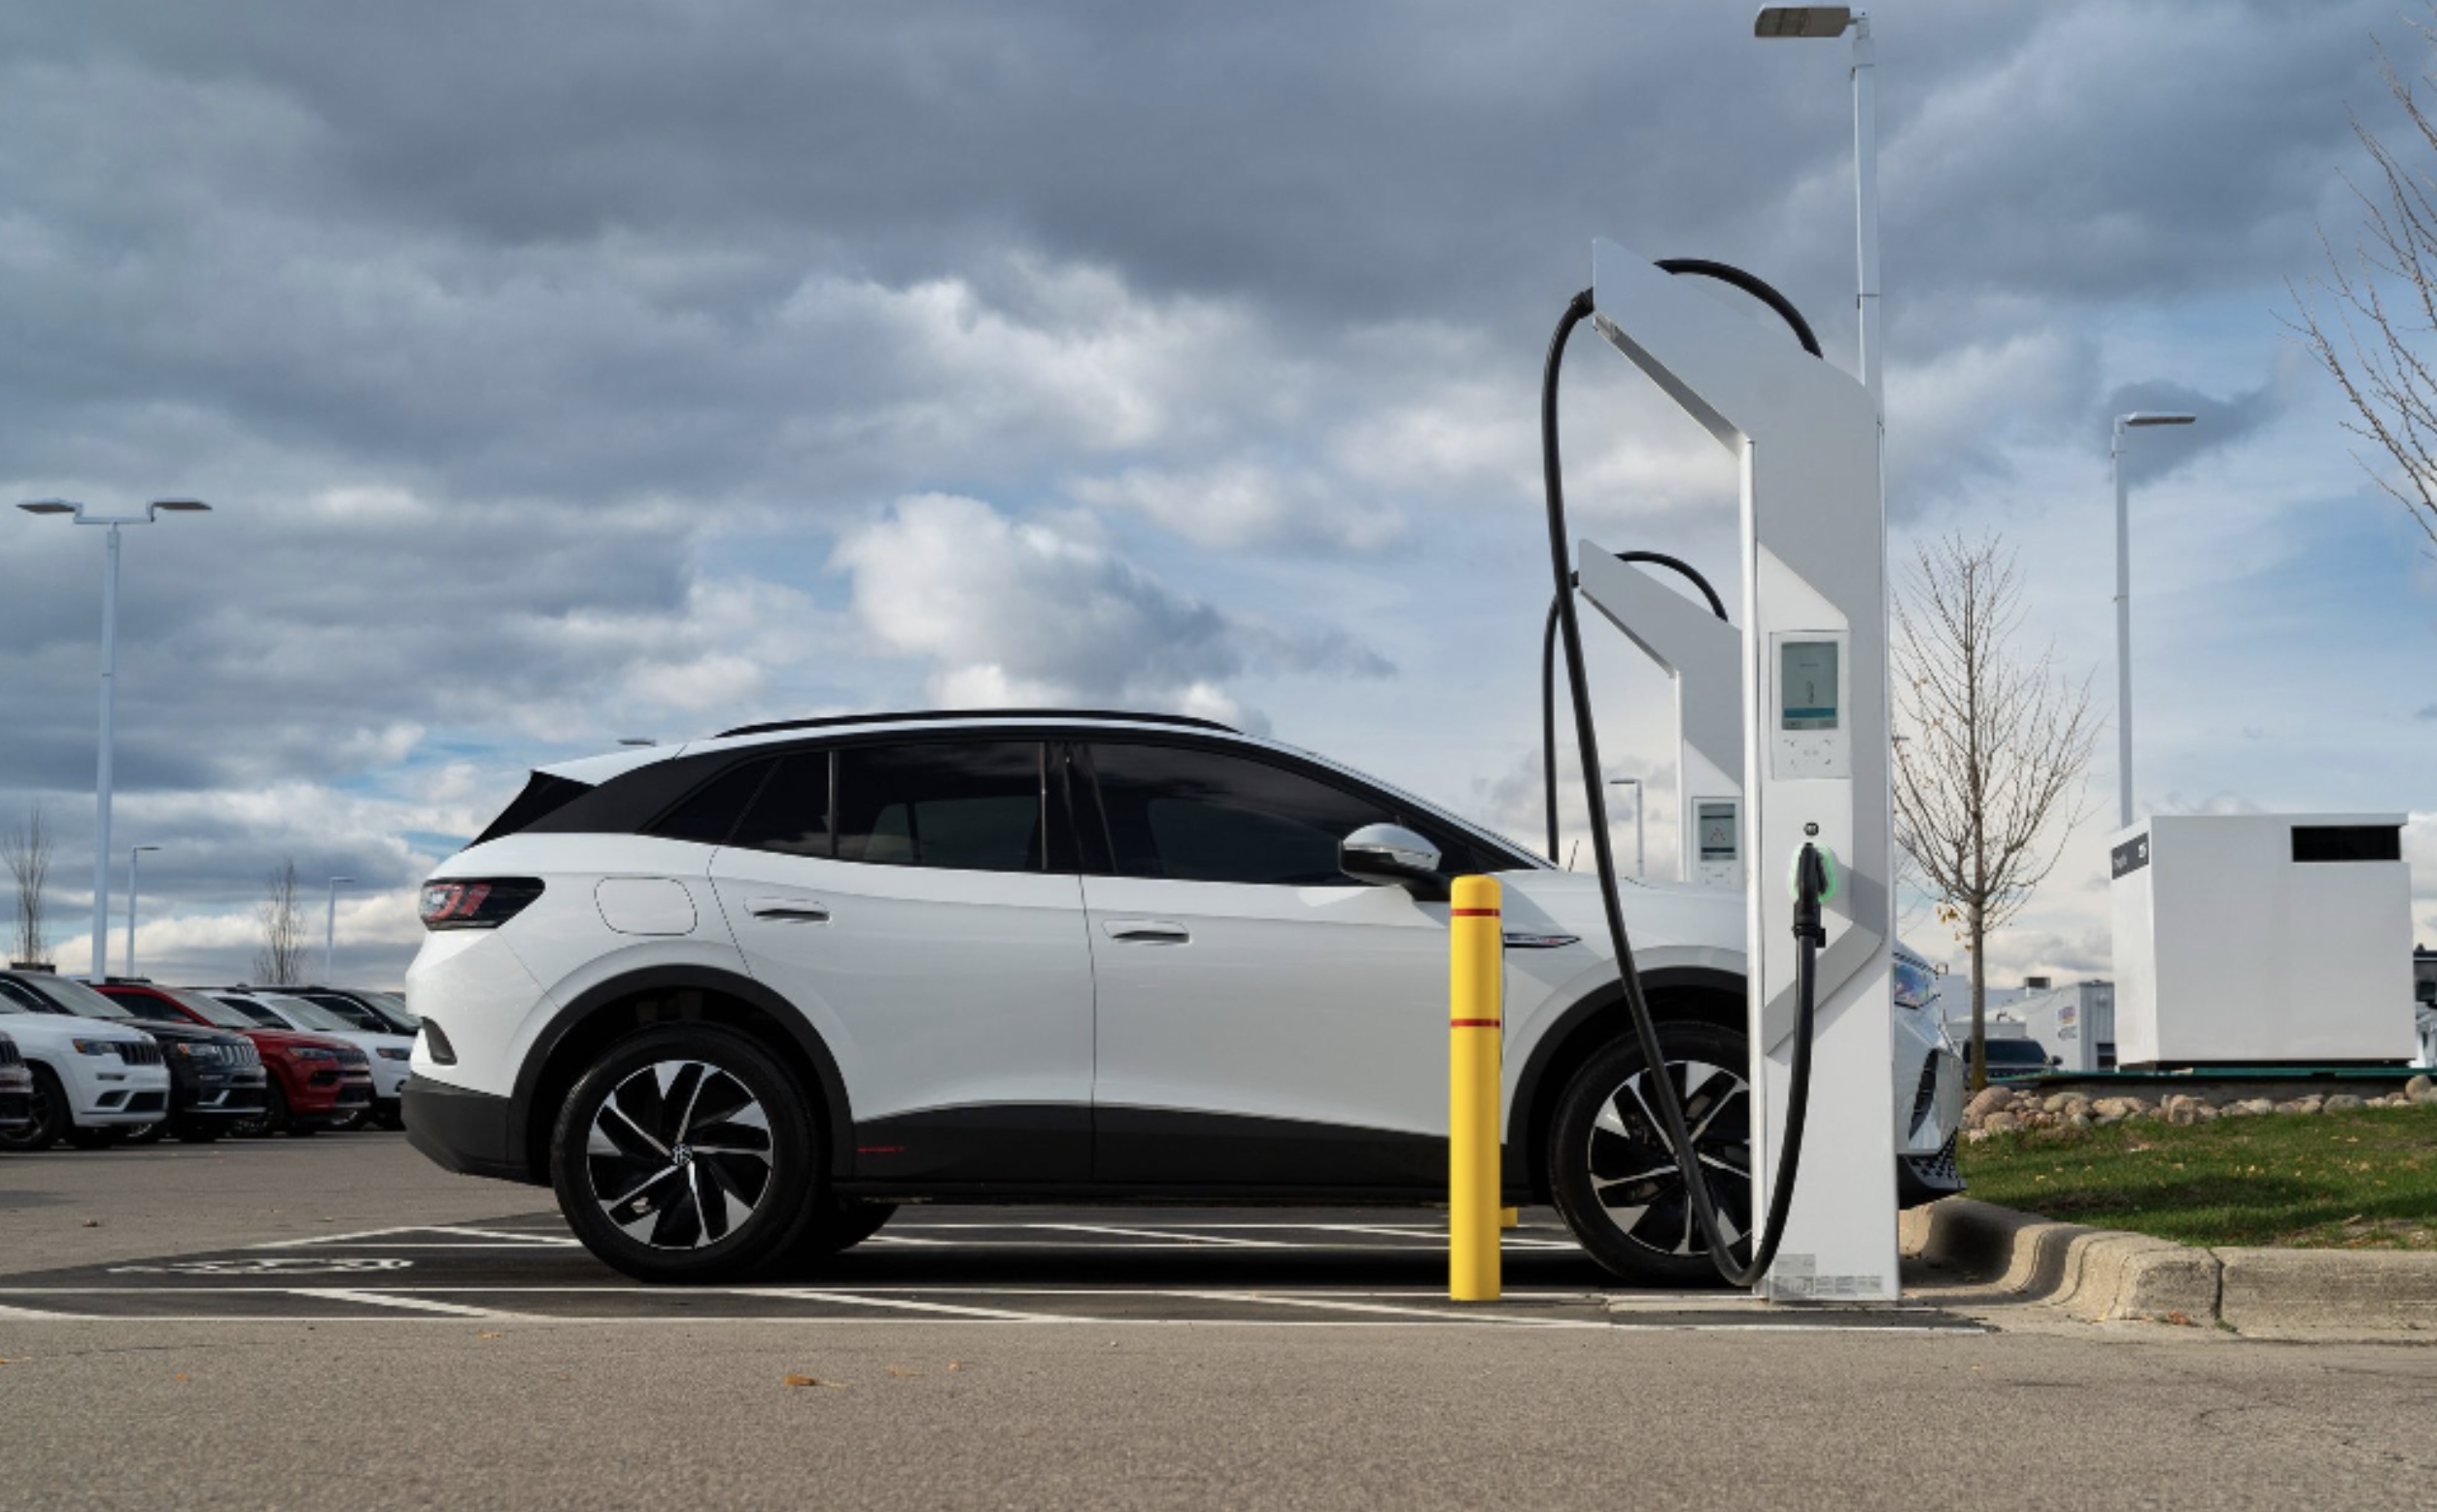 California to disperse $40.5 million in funding for EV fast-chargers